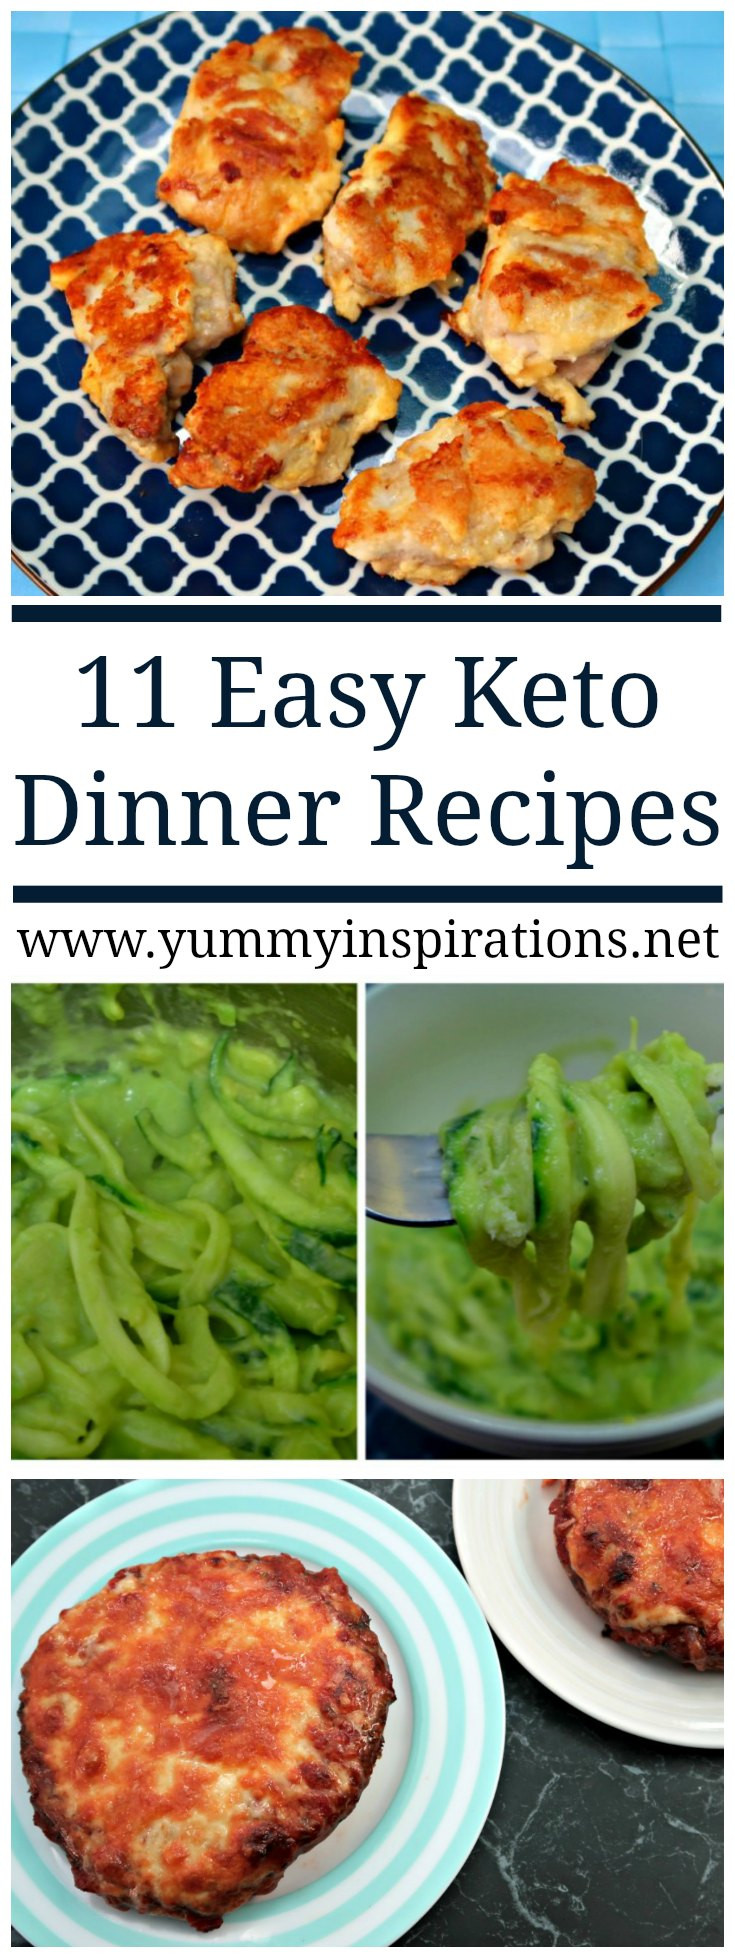 Keto Diet Meals Dinner
 11 Easy Keto Dinner Recipes Quick Low Carb Ketogenic